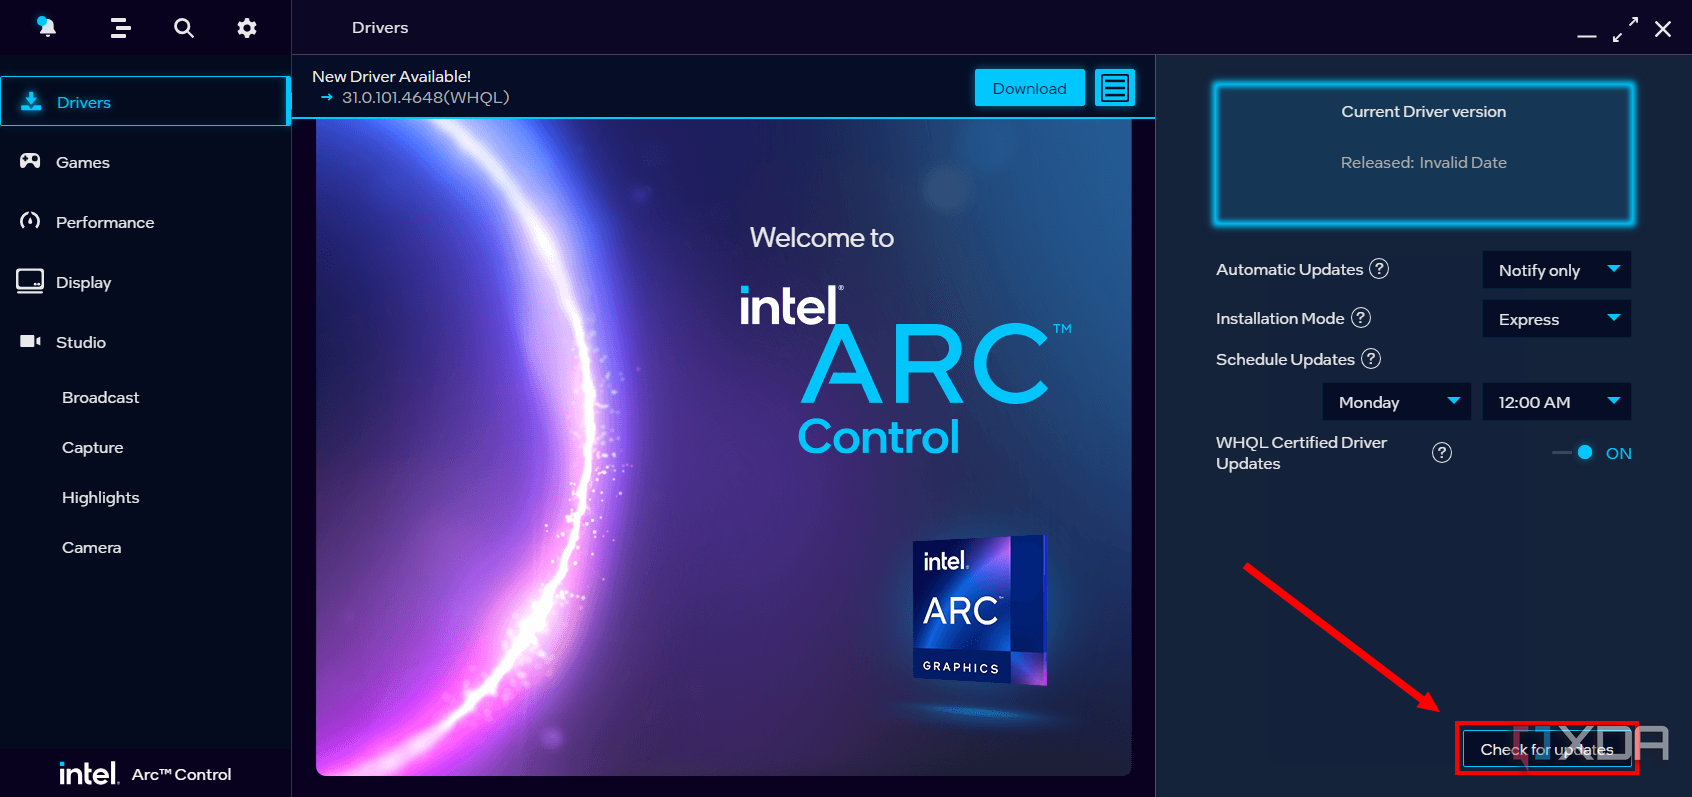 Screenshot of Intel Arc Control with the Check for updates button highlighted.